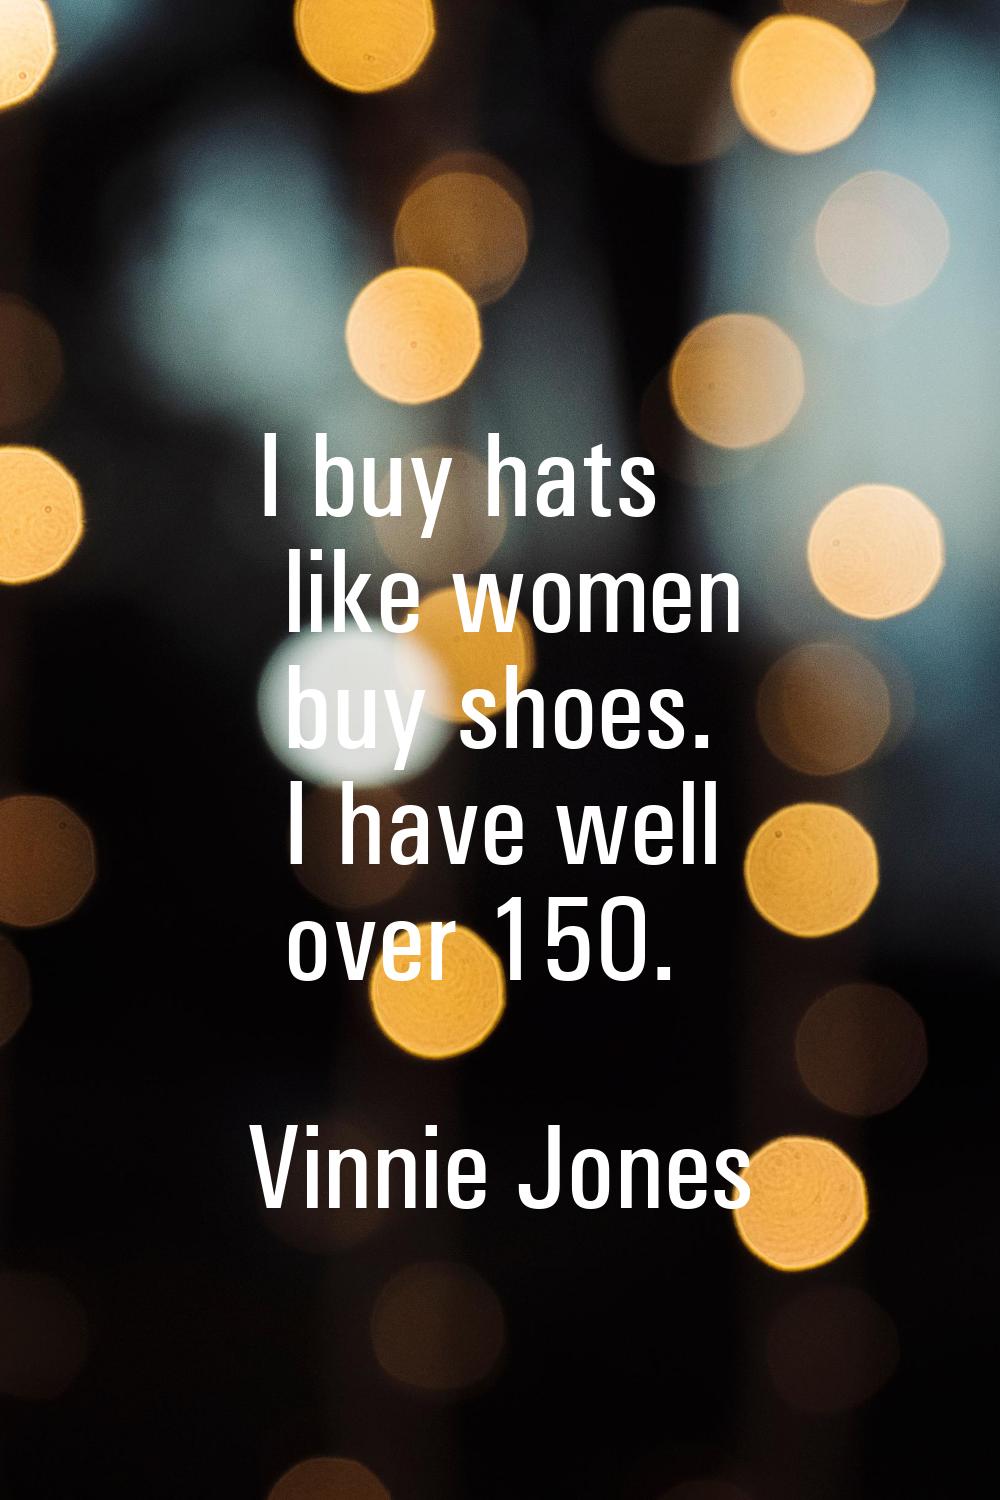 I buy hats like women buy shoes. I have well over 150.